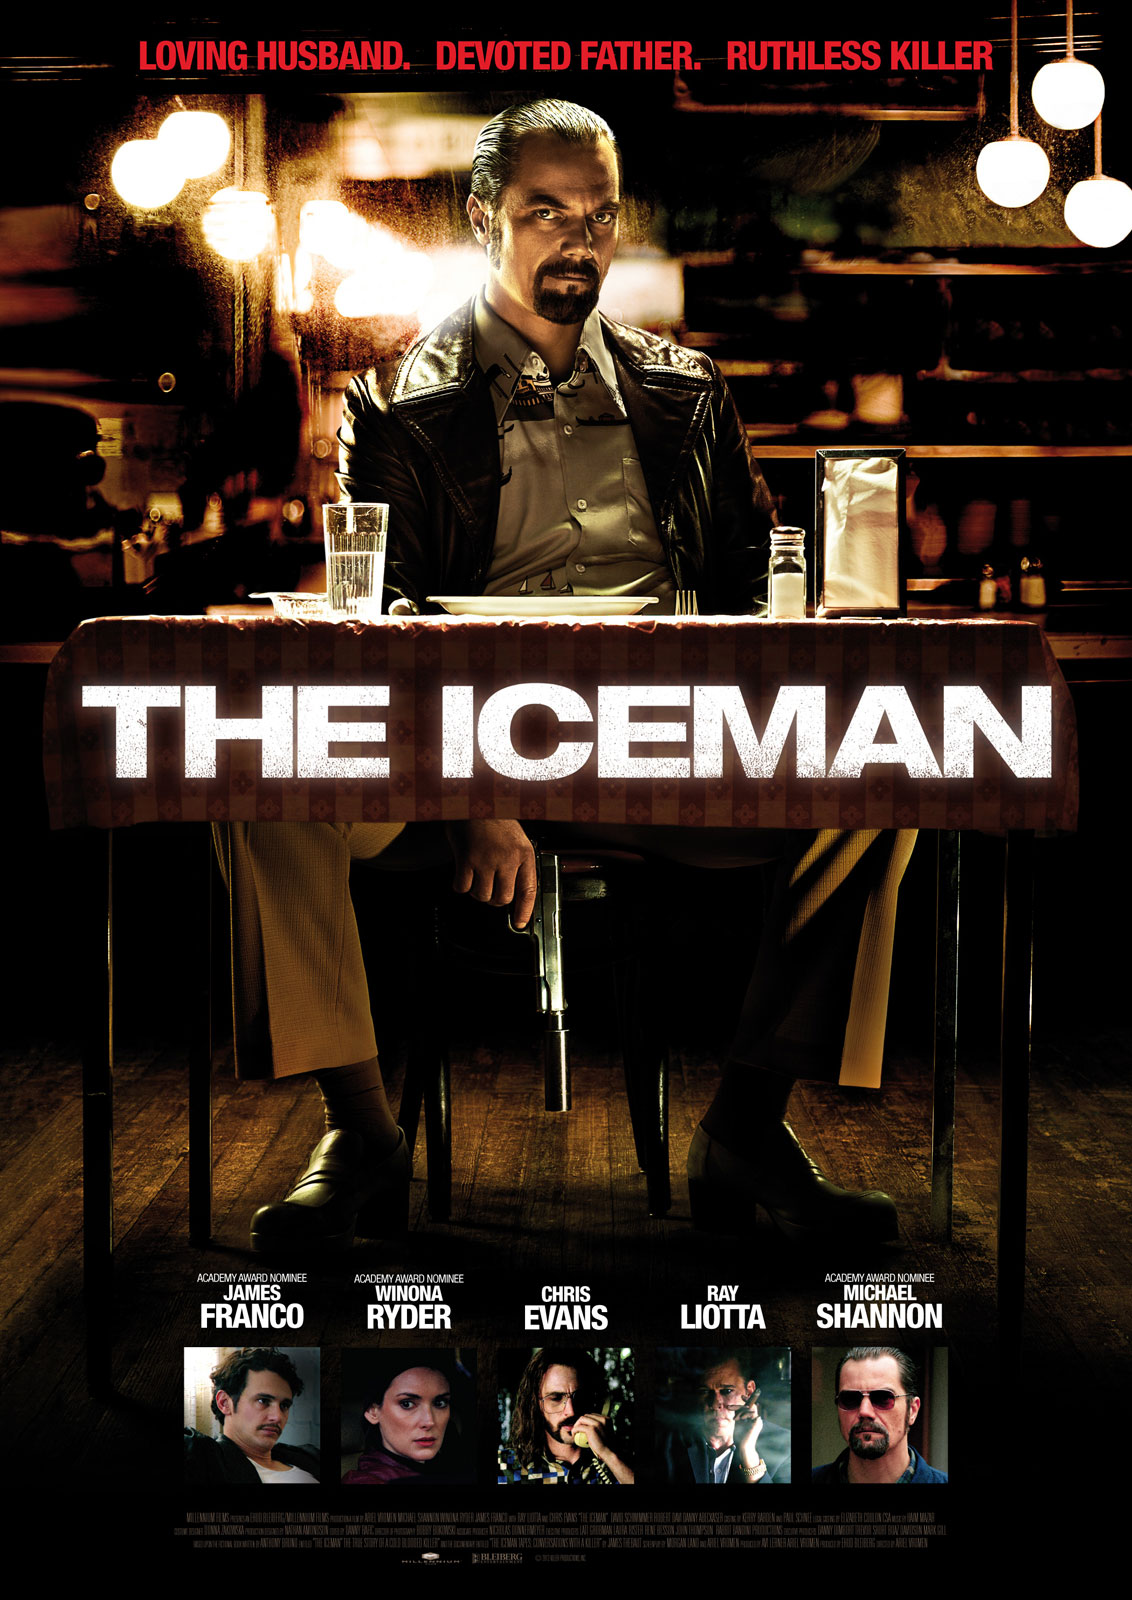 who is the iceman killer